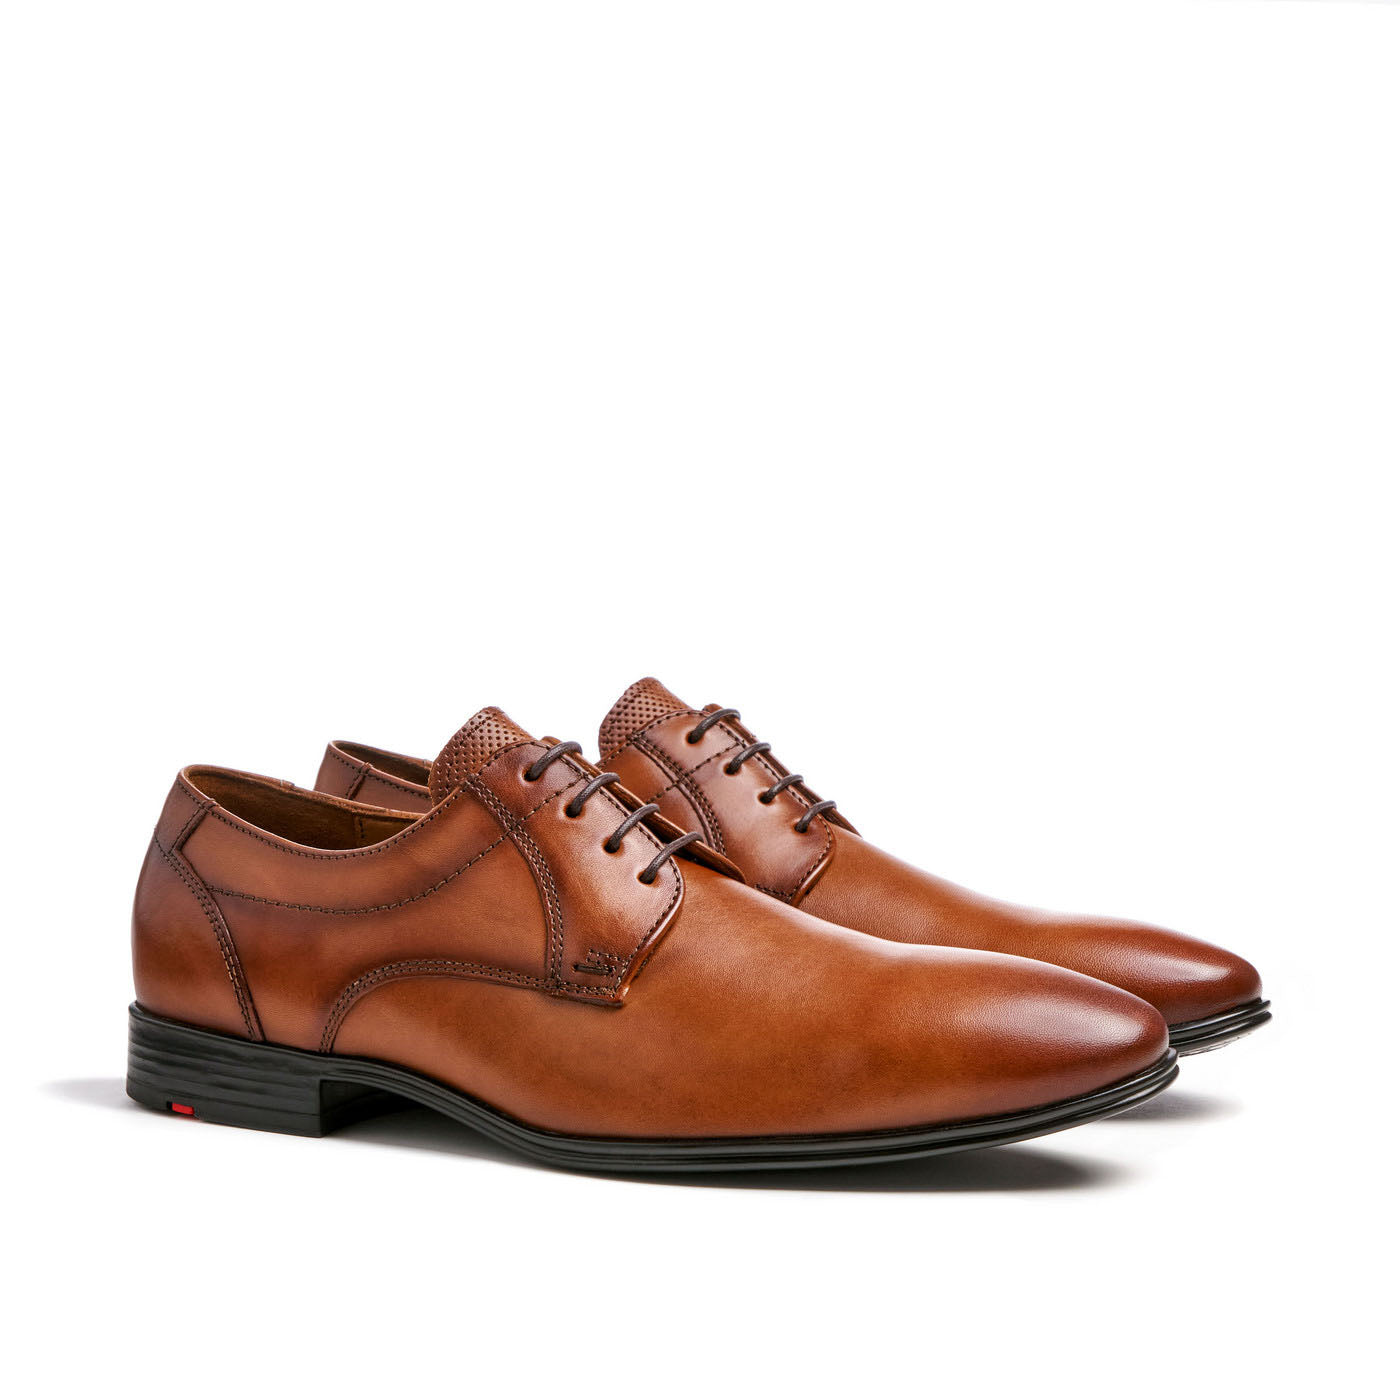 Angled view of the rich brown leather mens shoes.